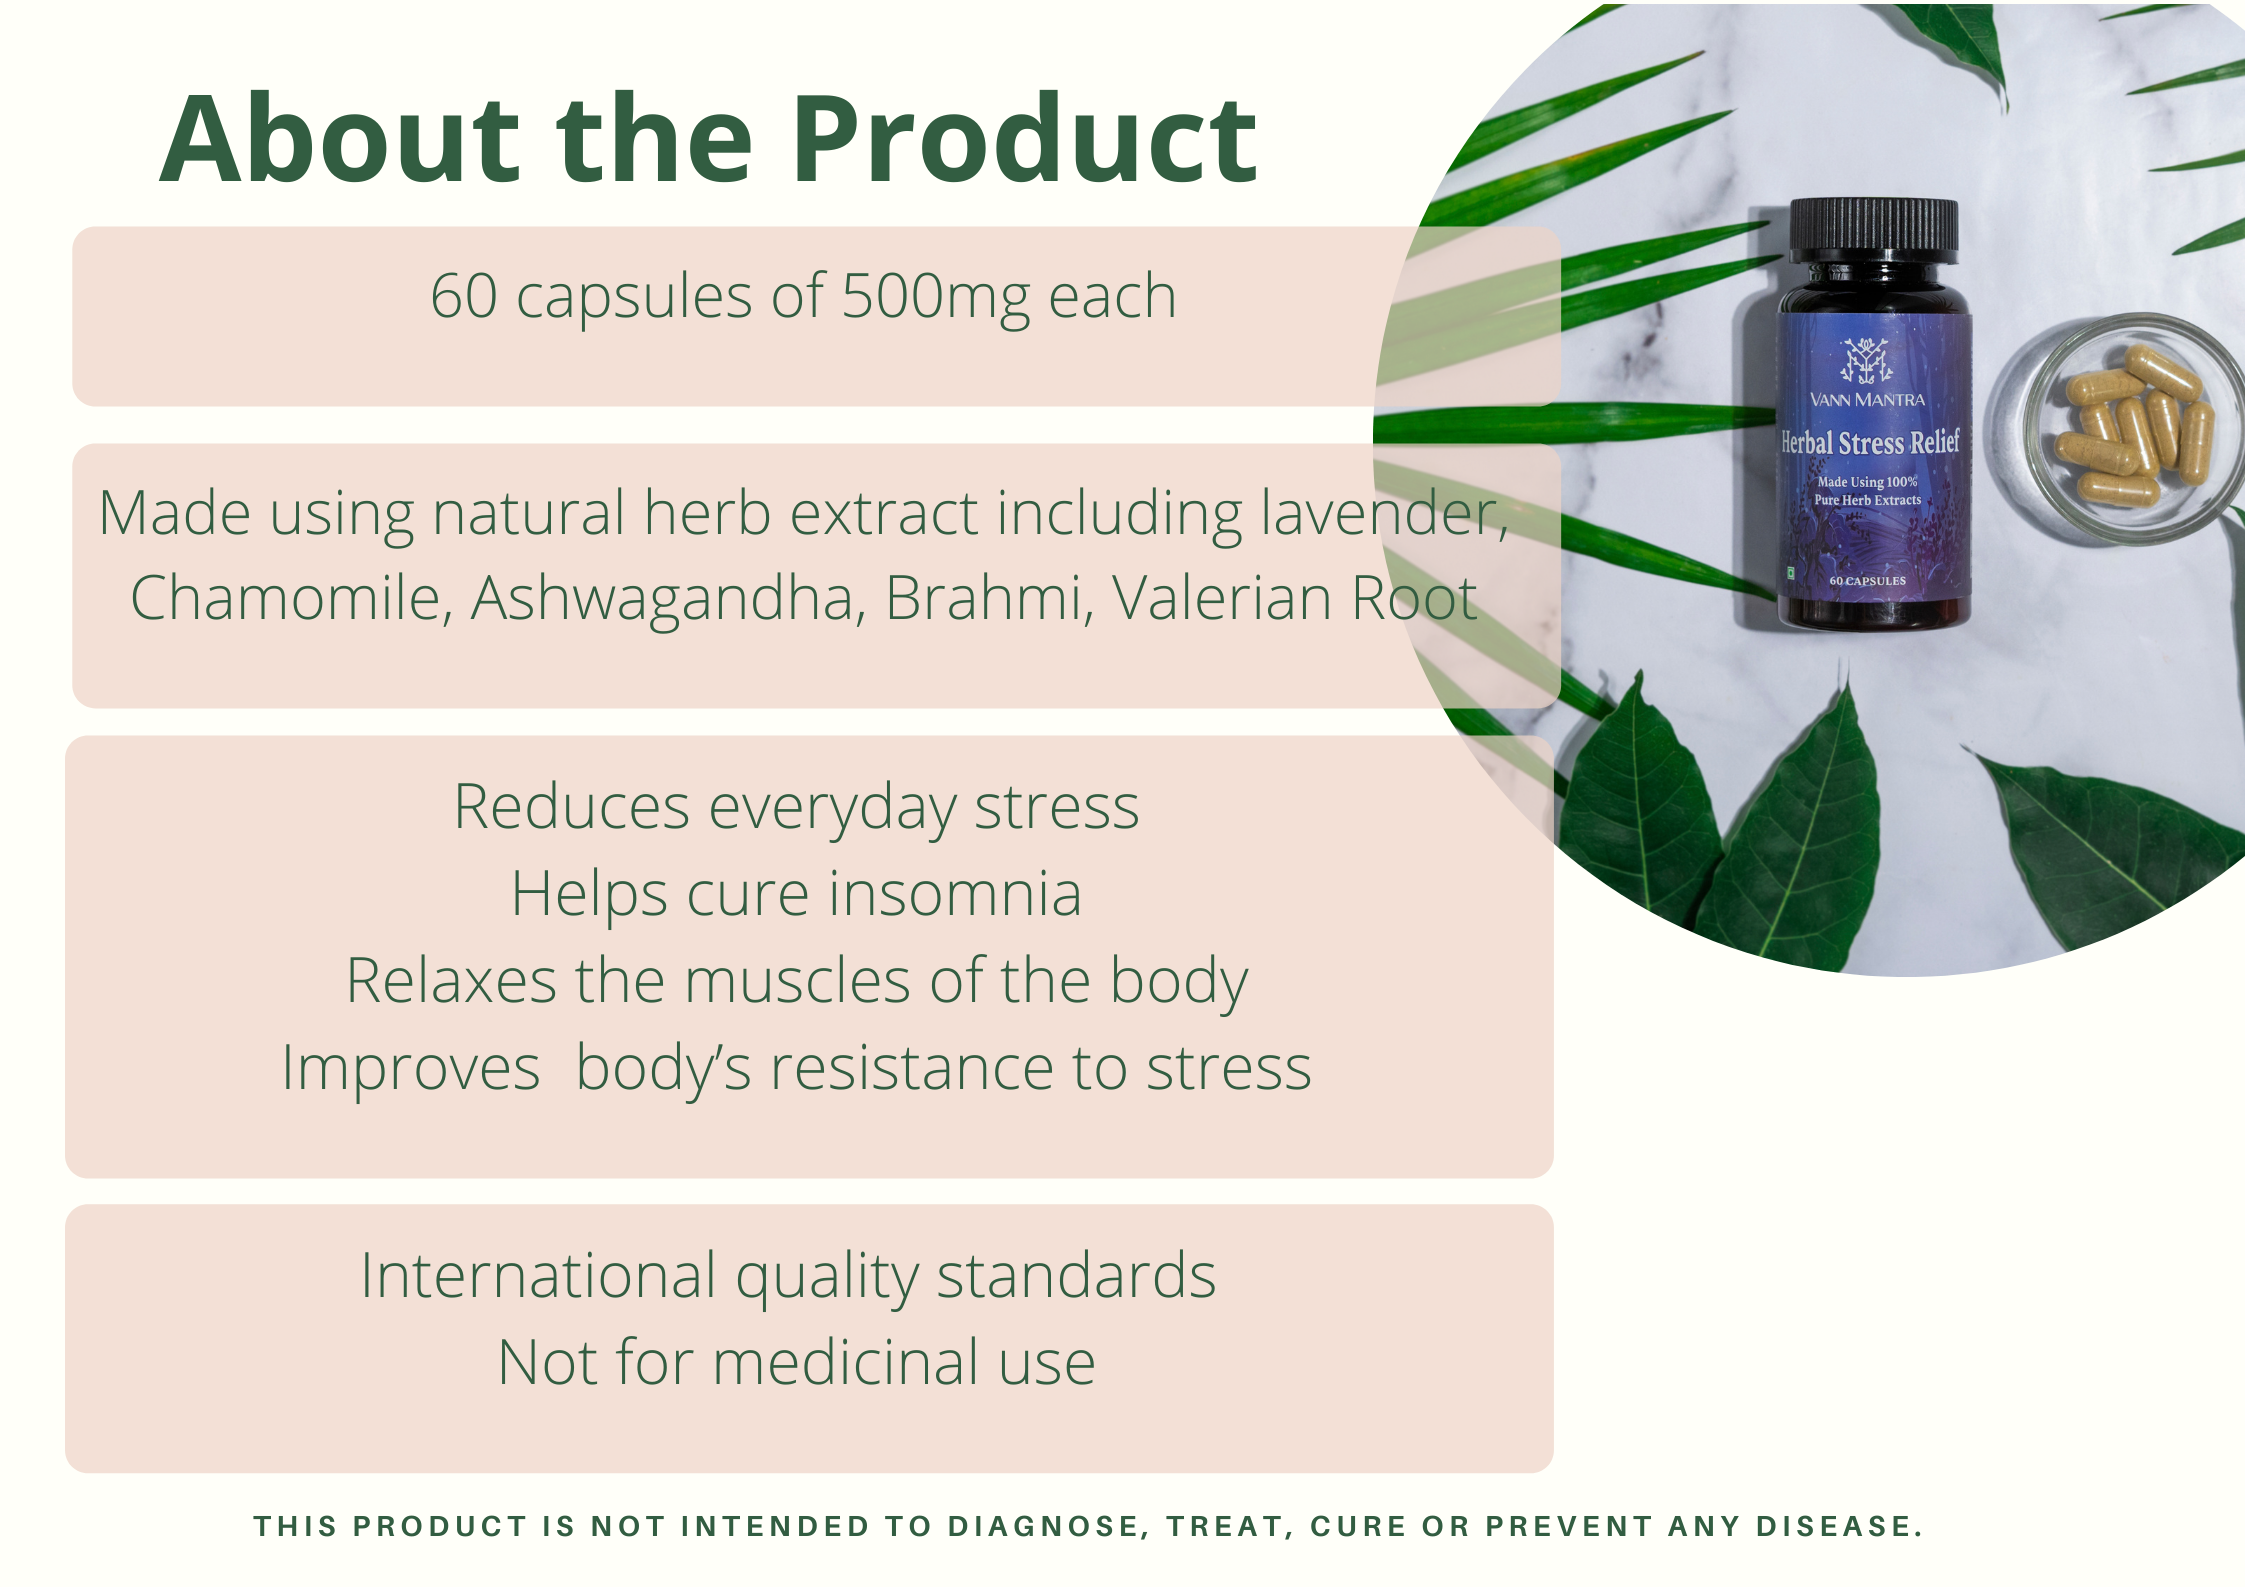 Infographic explaining the features and benefits of Herbal Stress Relief Capsules.